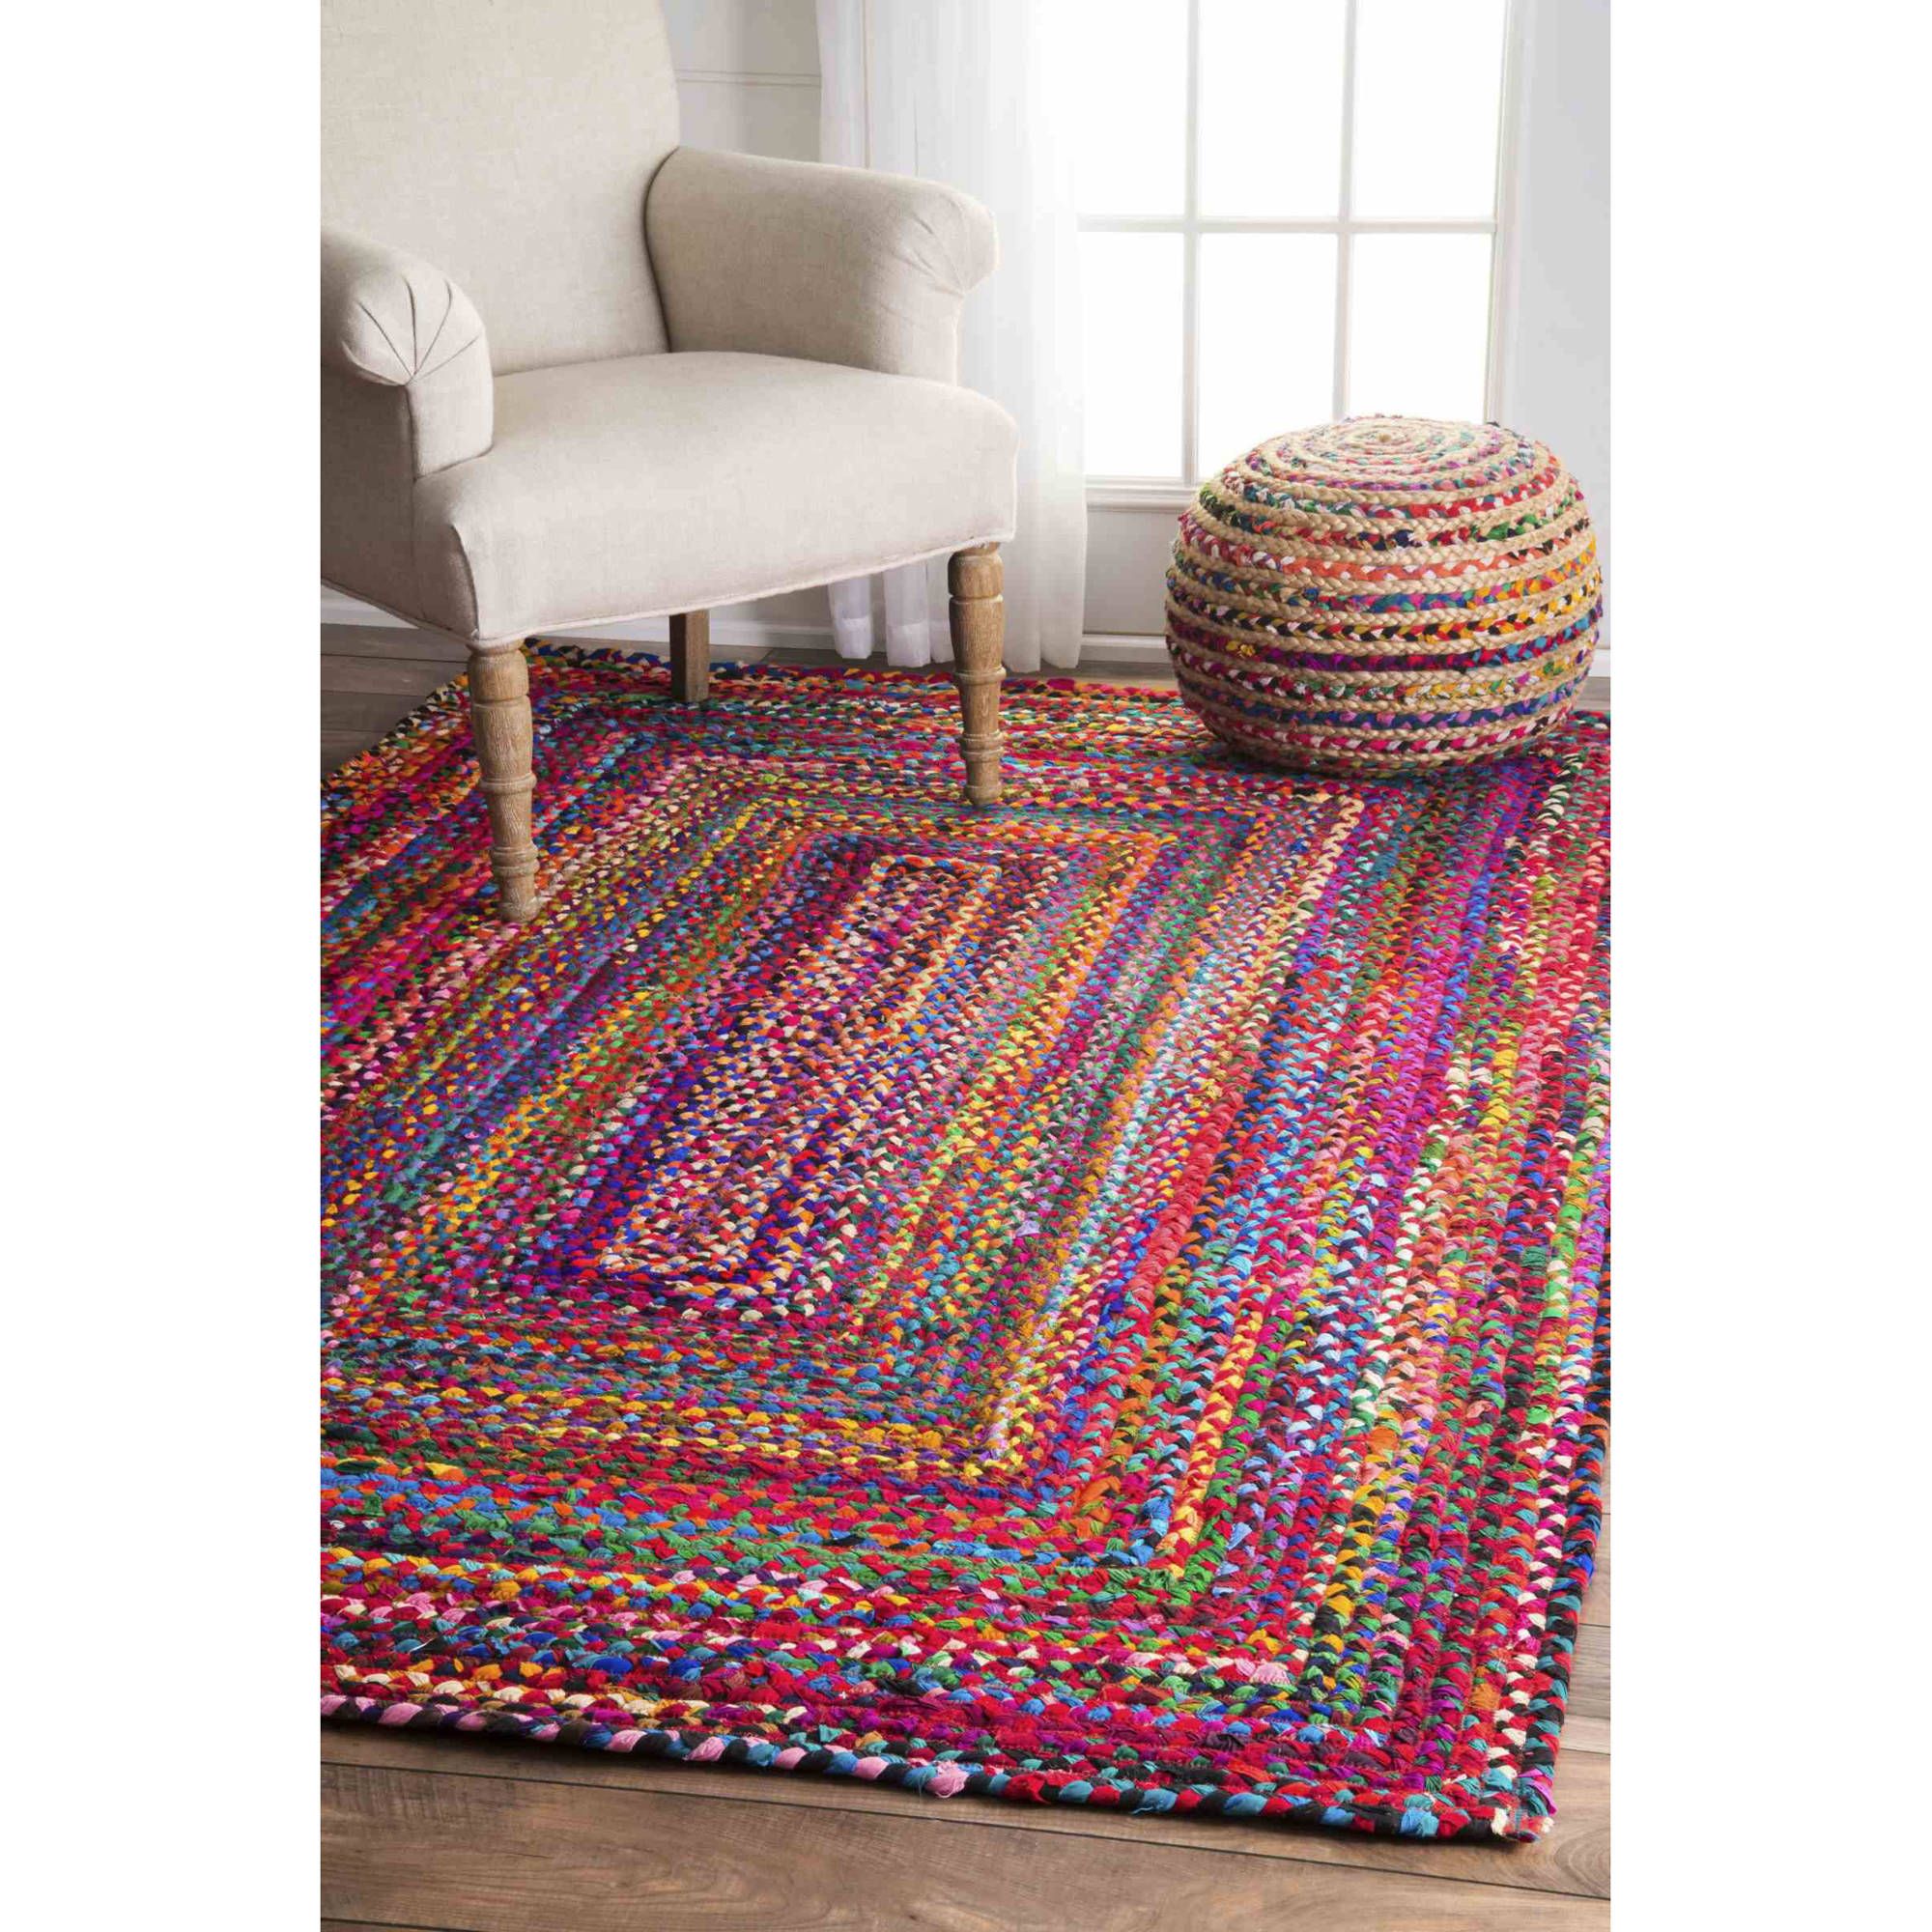 Nuloom Hand Braided Tammara Area Rug – Walmart Intended For Hand Woven Braided Rugs (View 13 of 15)